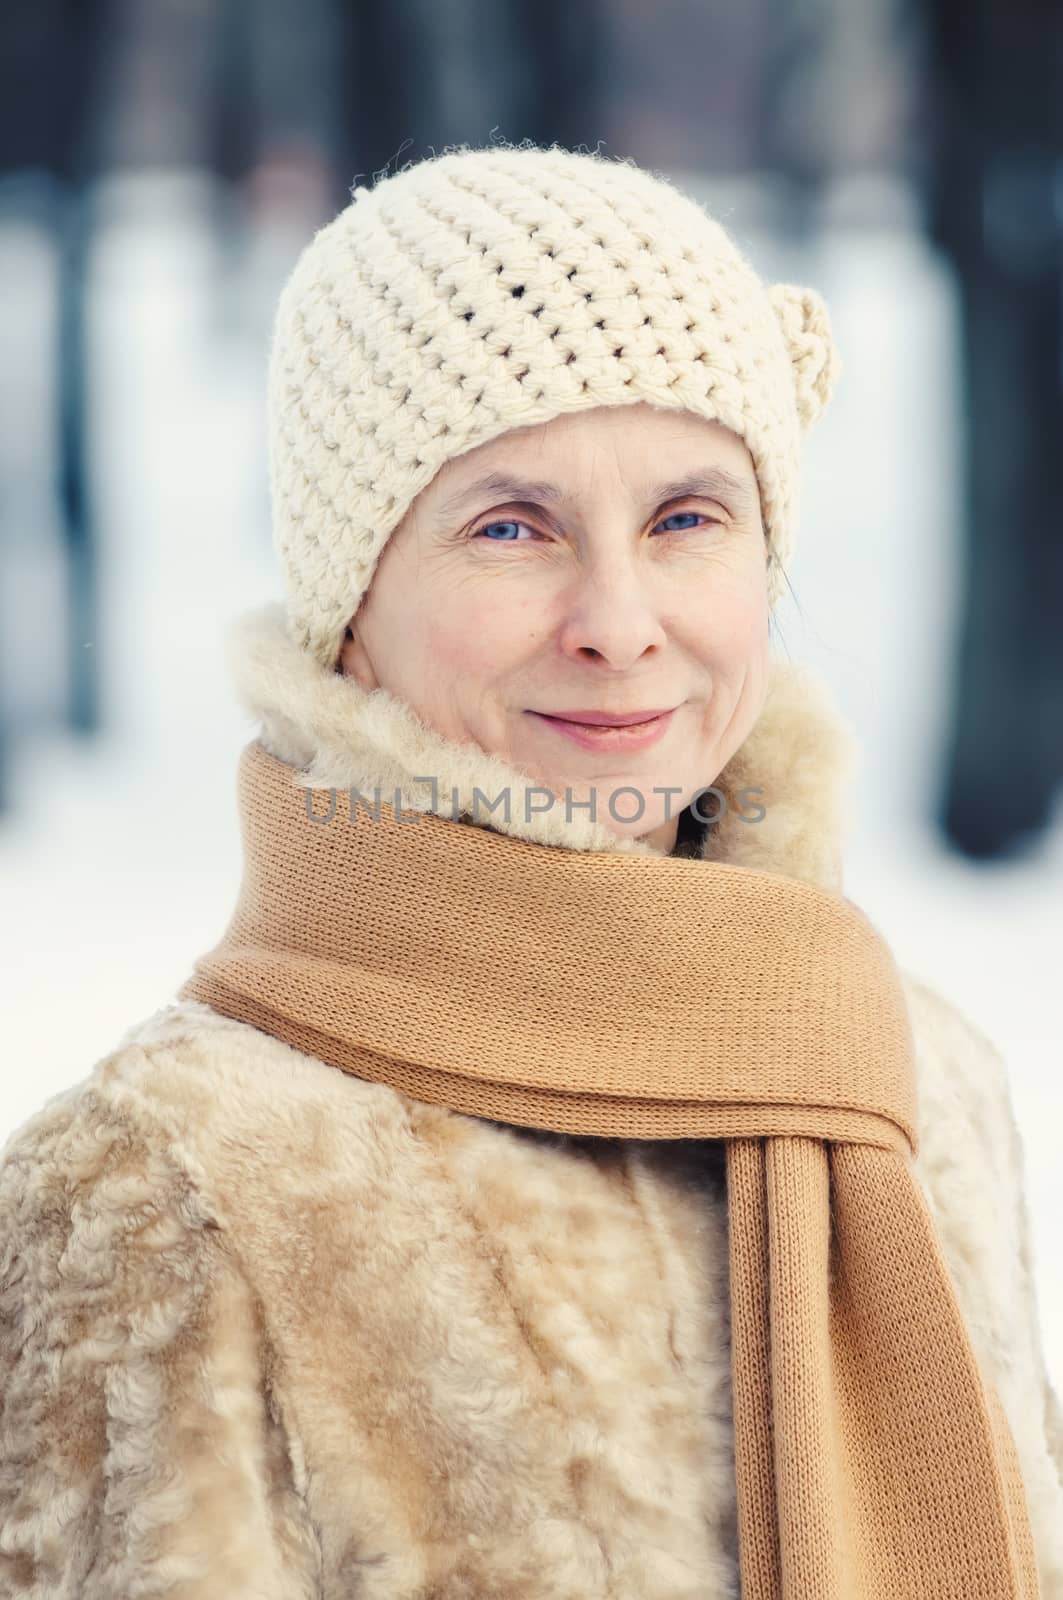 Portrait of a natural adult woman with a scarf and a a woolen hat, outdoor during winter